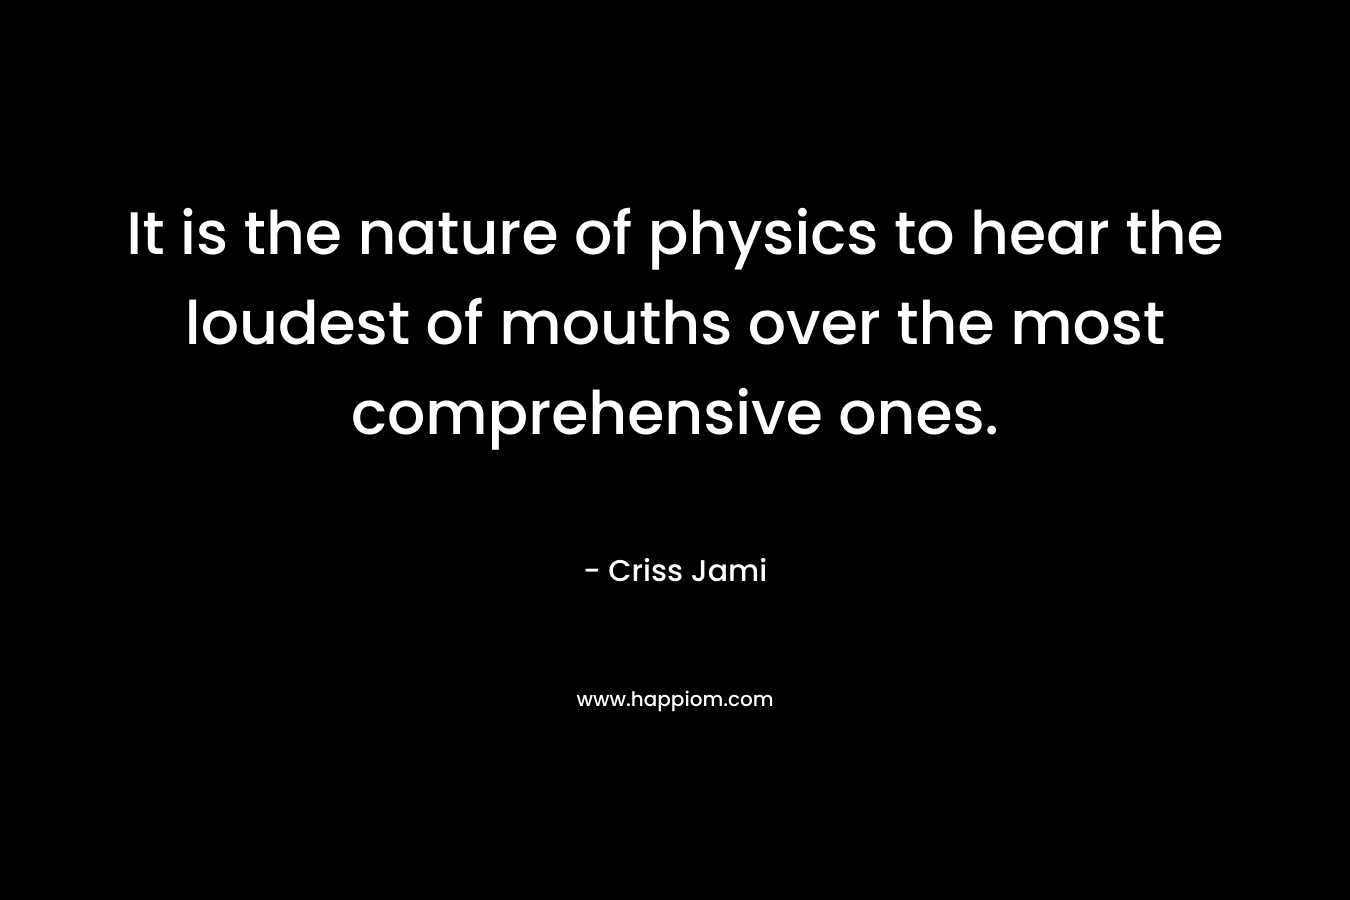 It is the nature of physics to hear the loudest of mouths over the most comprehensive ones.